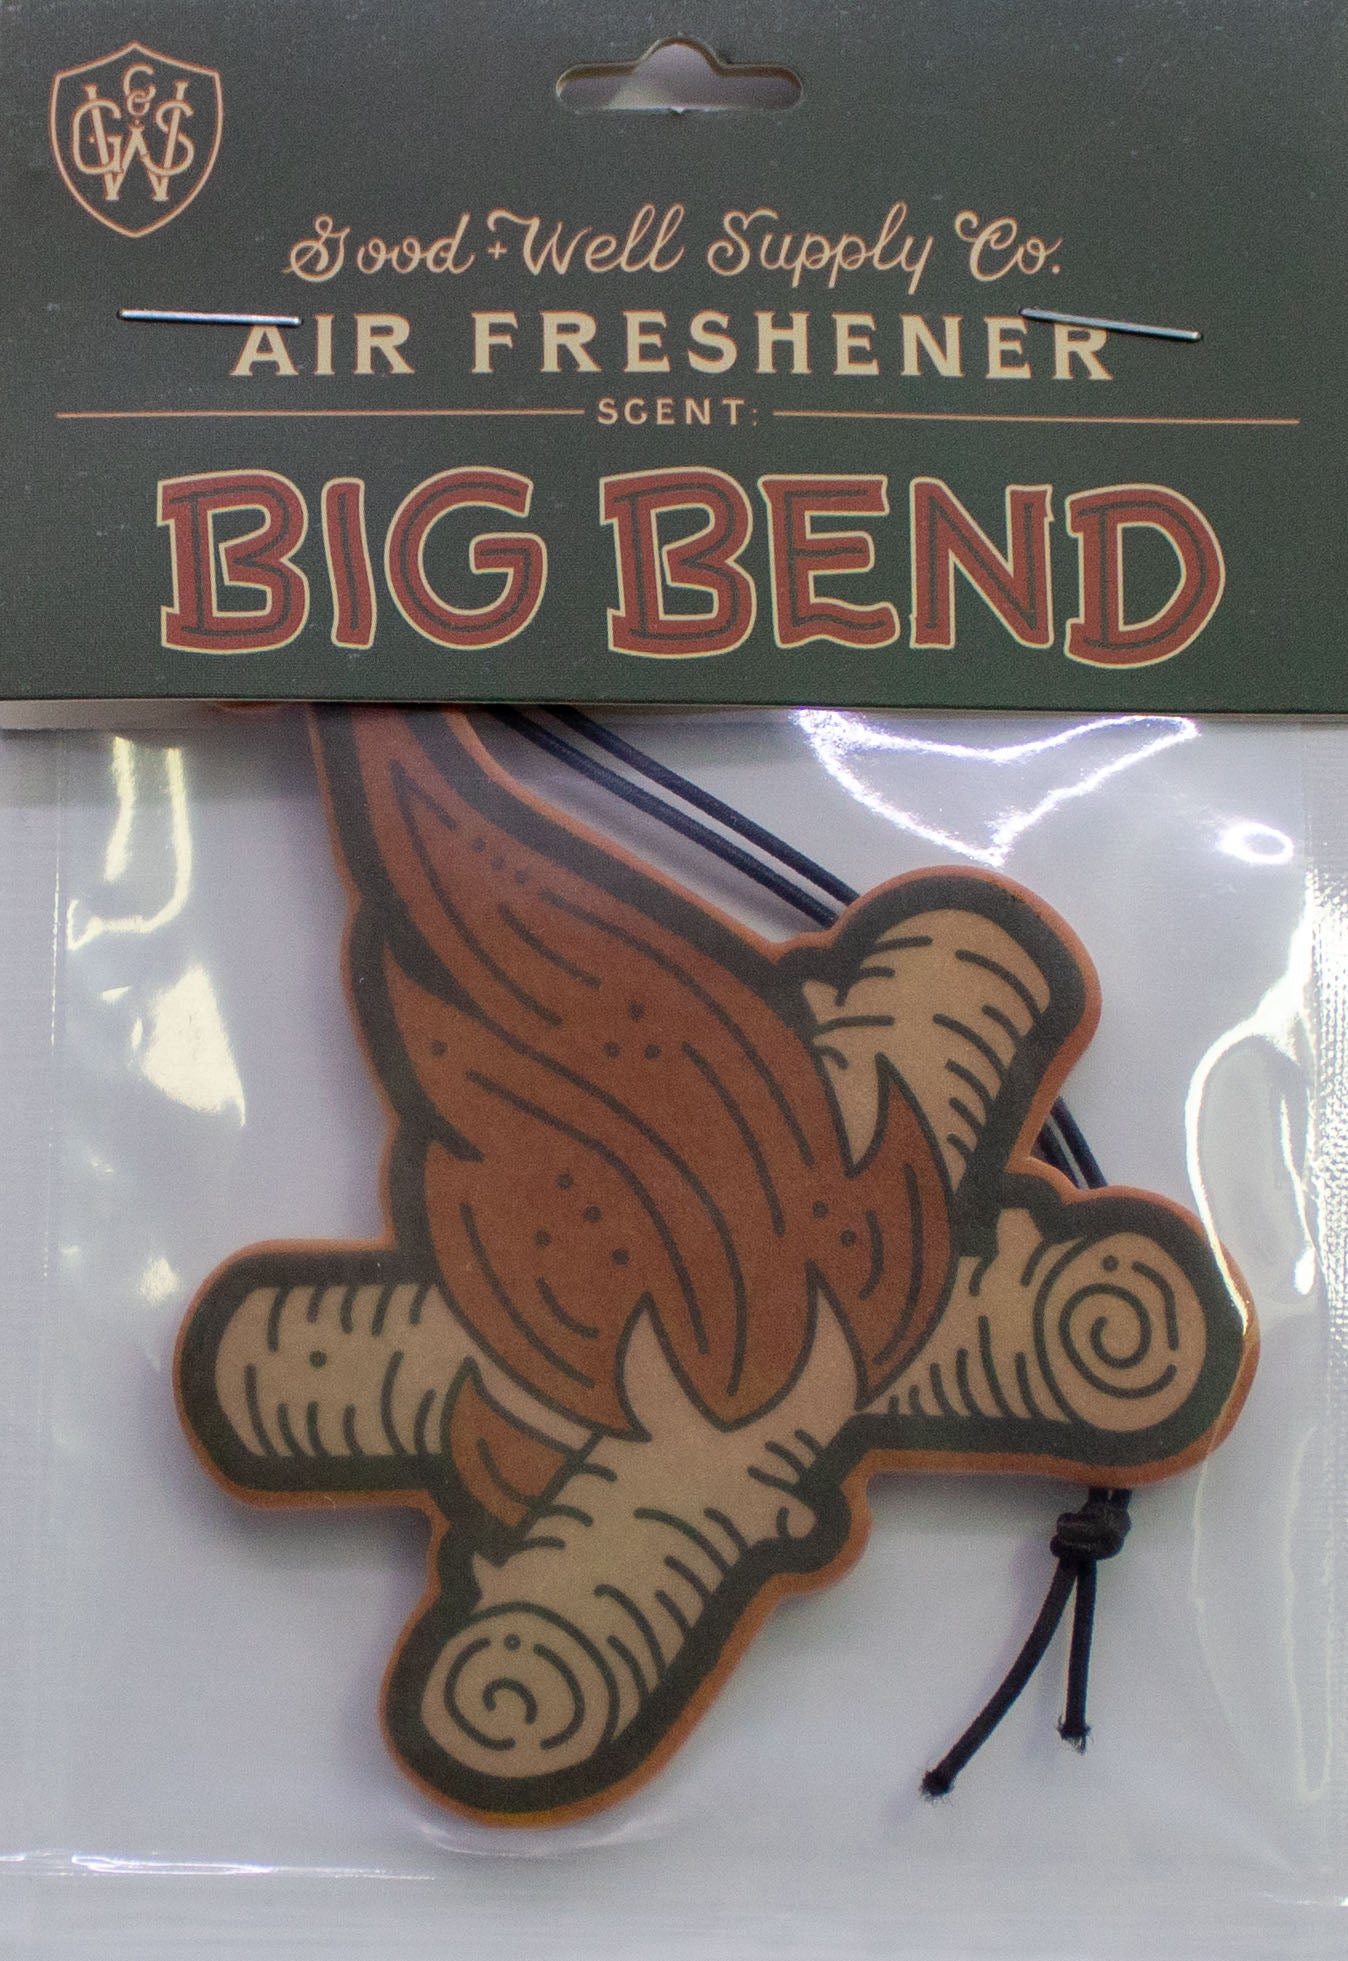 Good and Well Supply Co. Air Freshener Big Bend